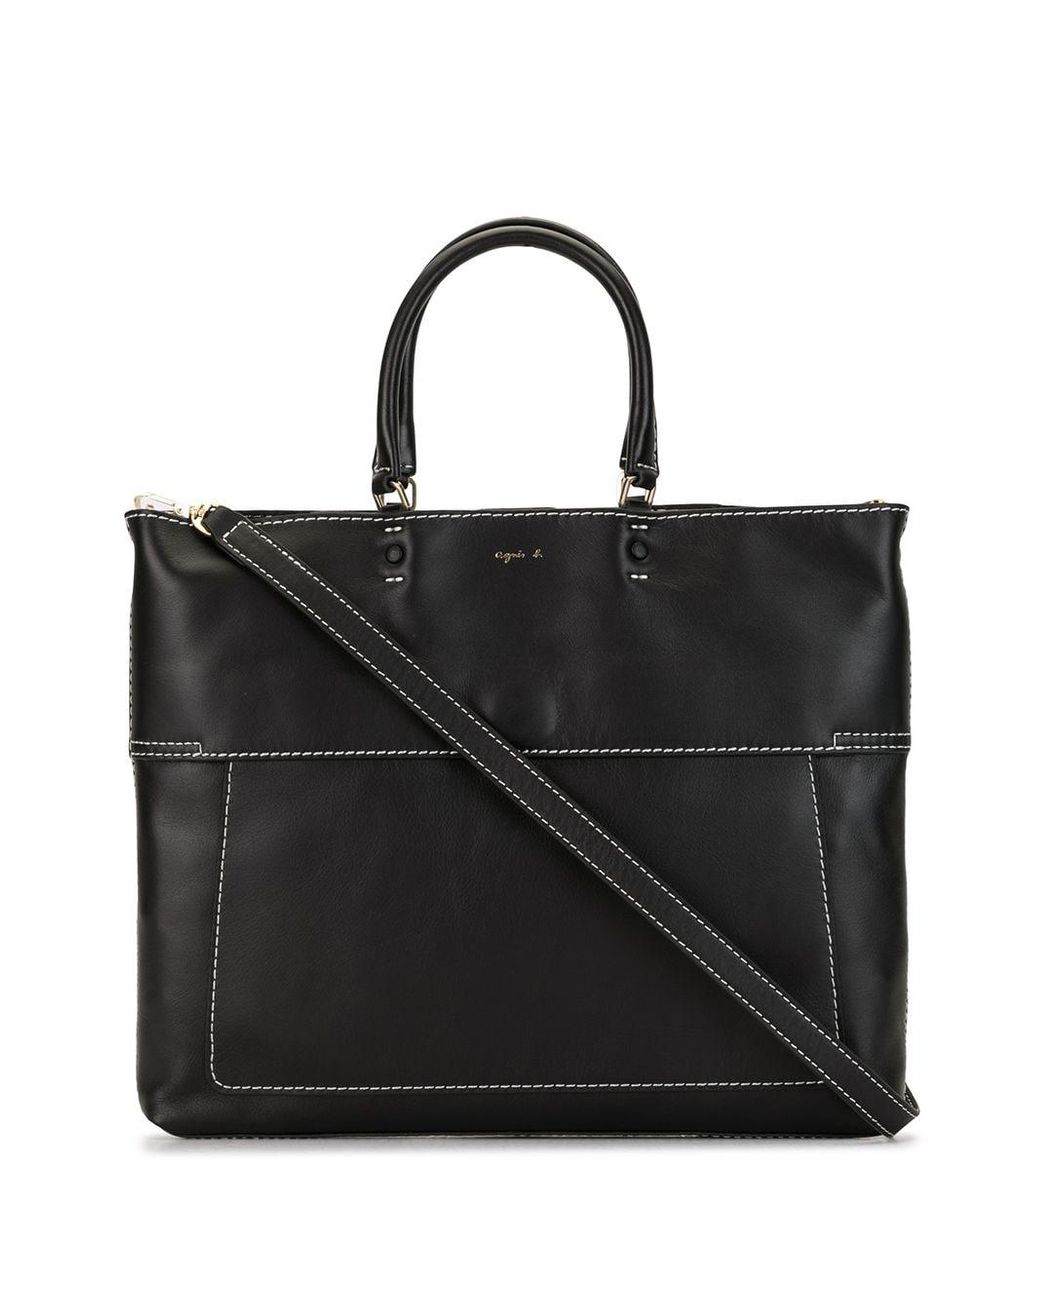 agnès b. Leather Topstitched Tote Bag in Black - Lyst